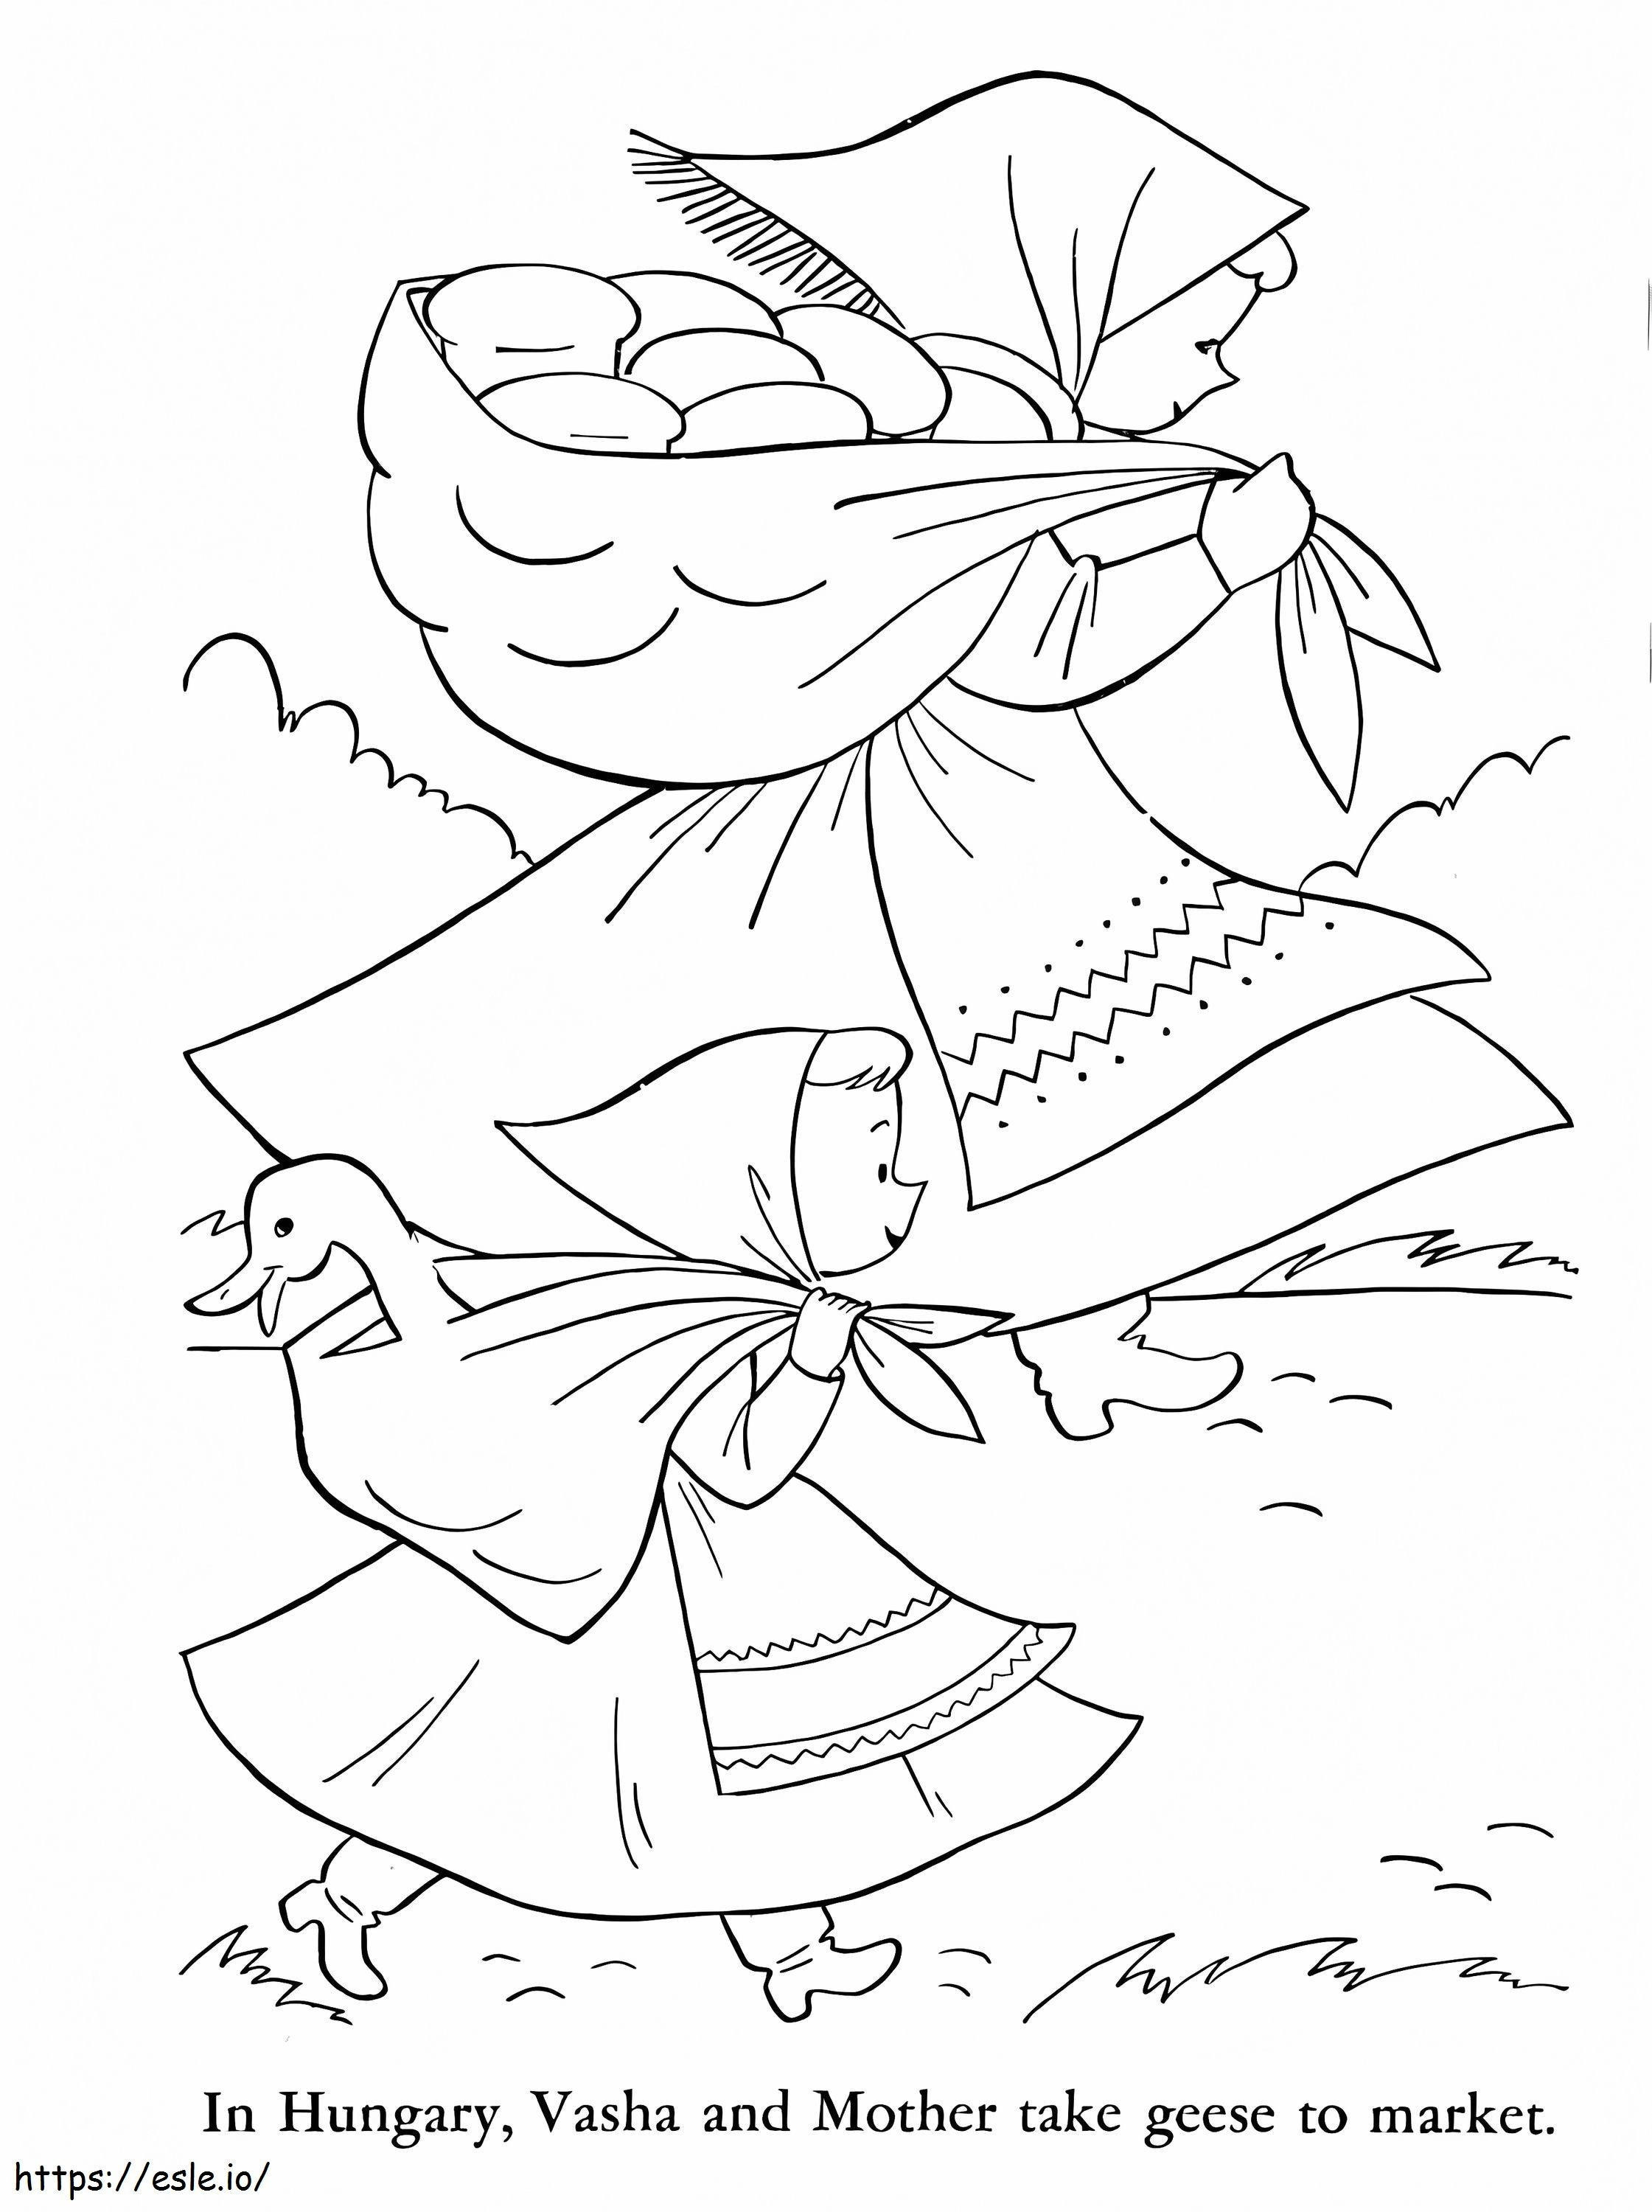 Vasha And Mother From Hungary coloring page